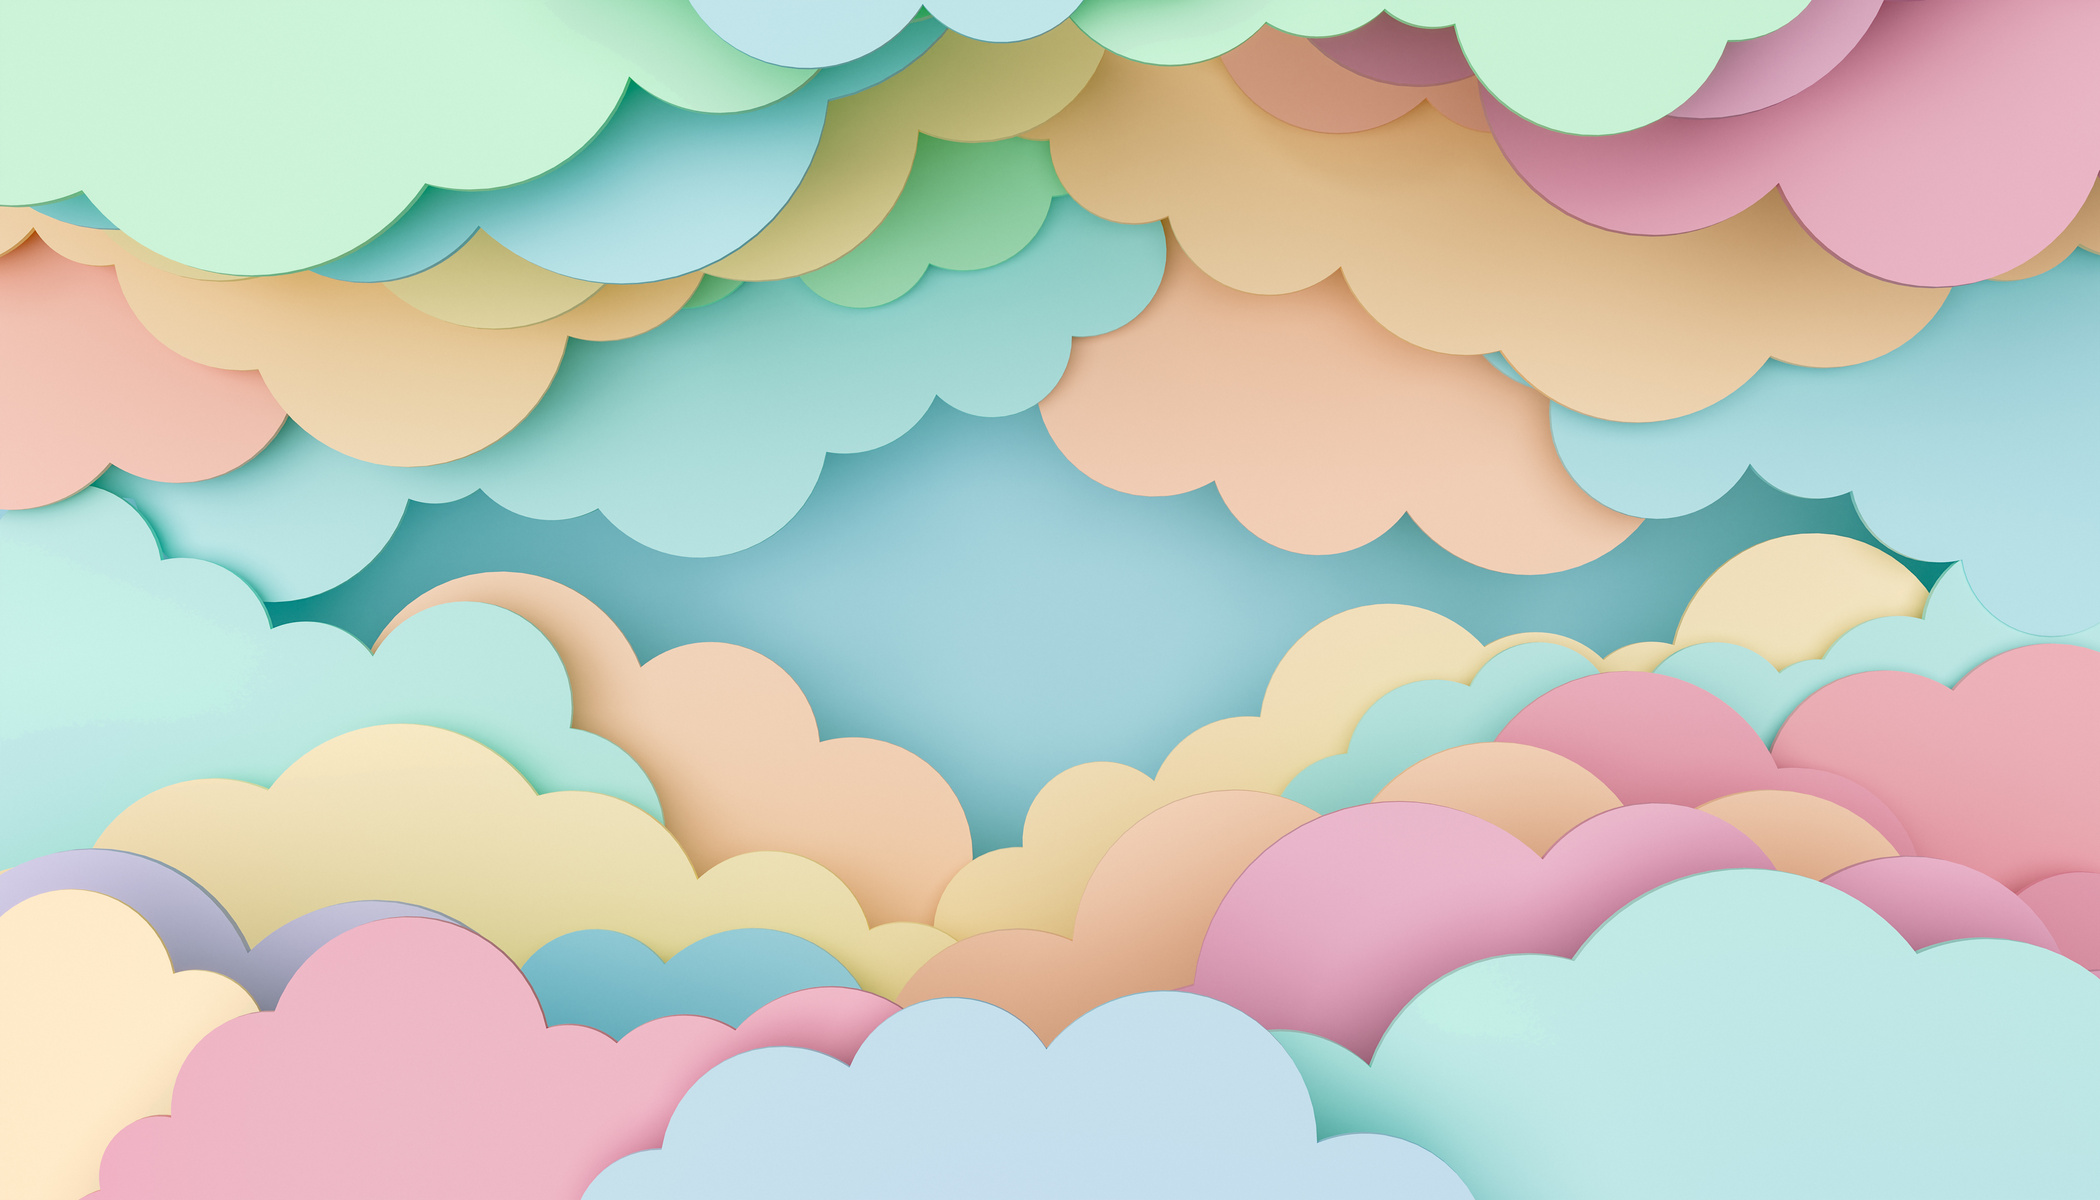 Childish Background of Colorful Flat Clouds